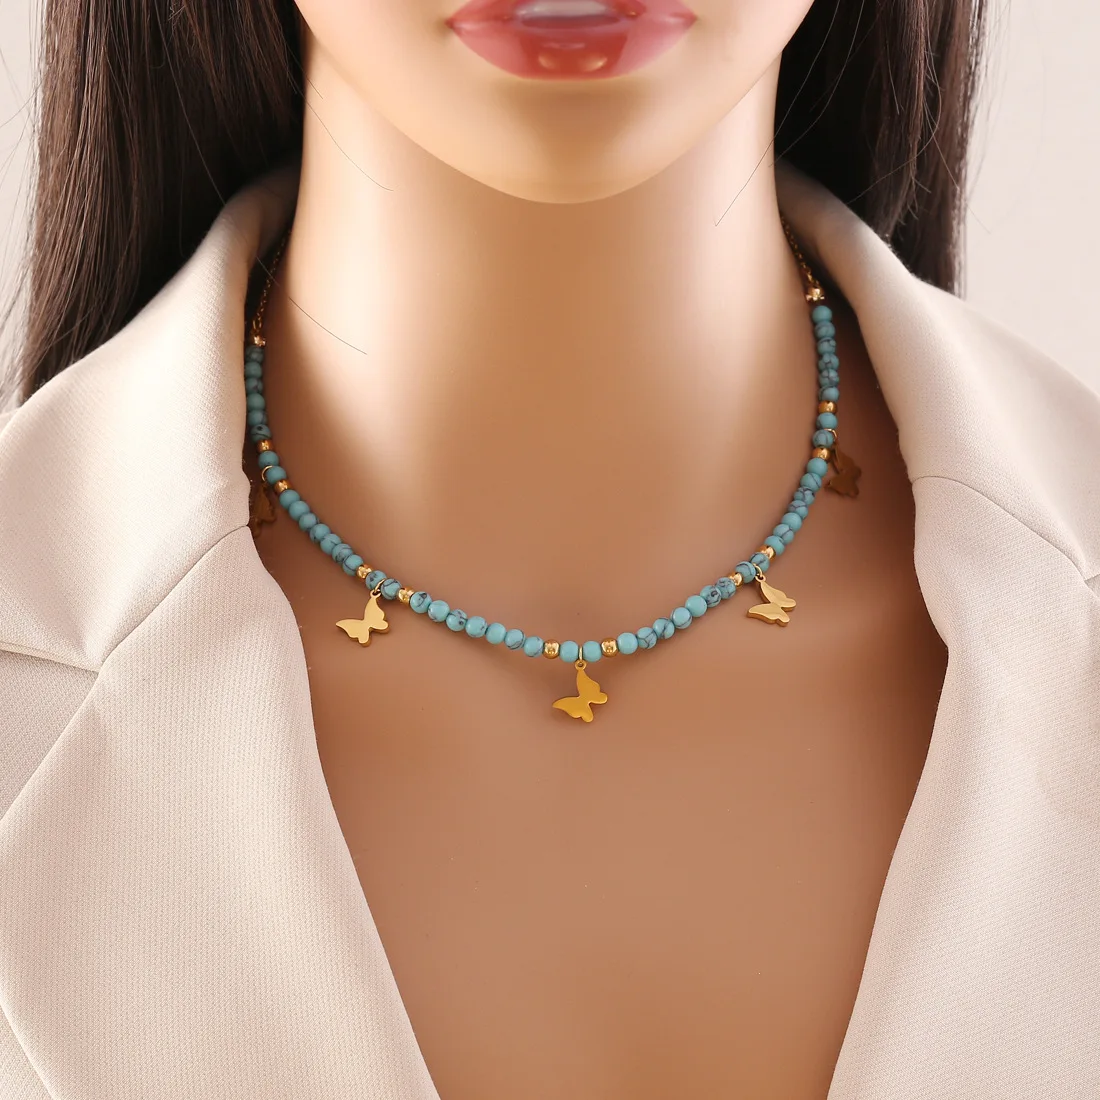 Hot sale gold plated stainless steel turquoise beads chain butterfly charm necklace non tarnish waterproof necklace